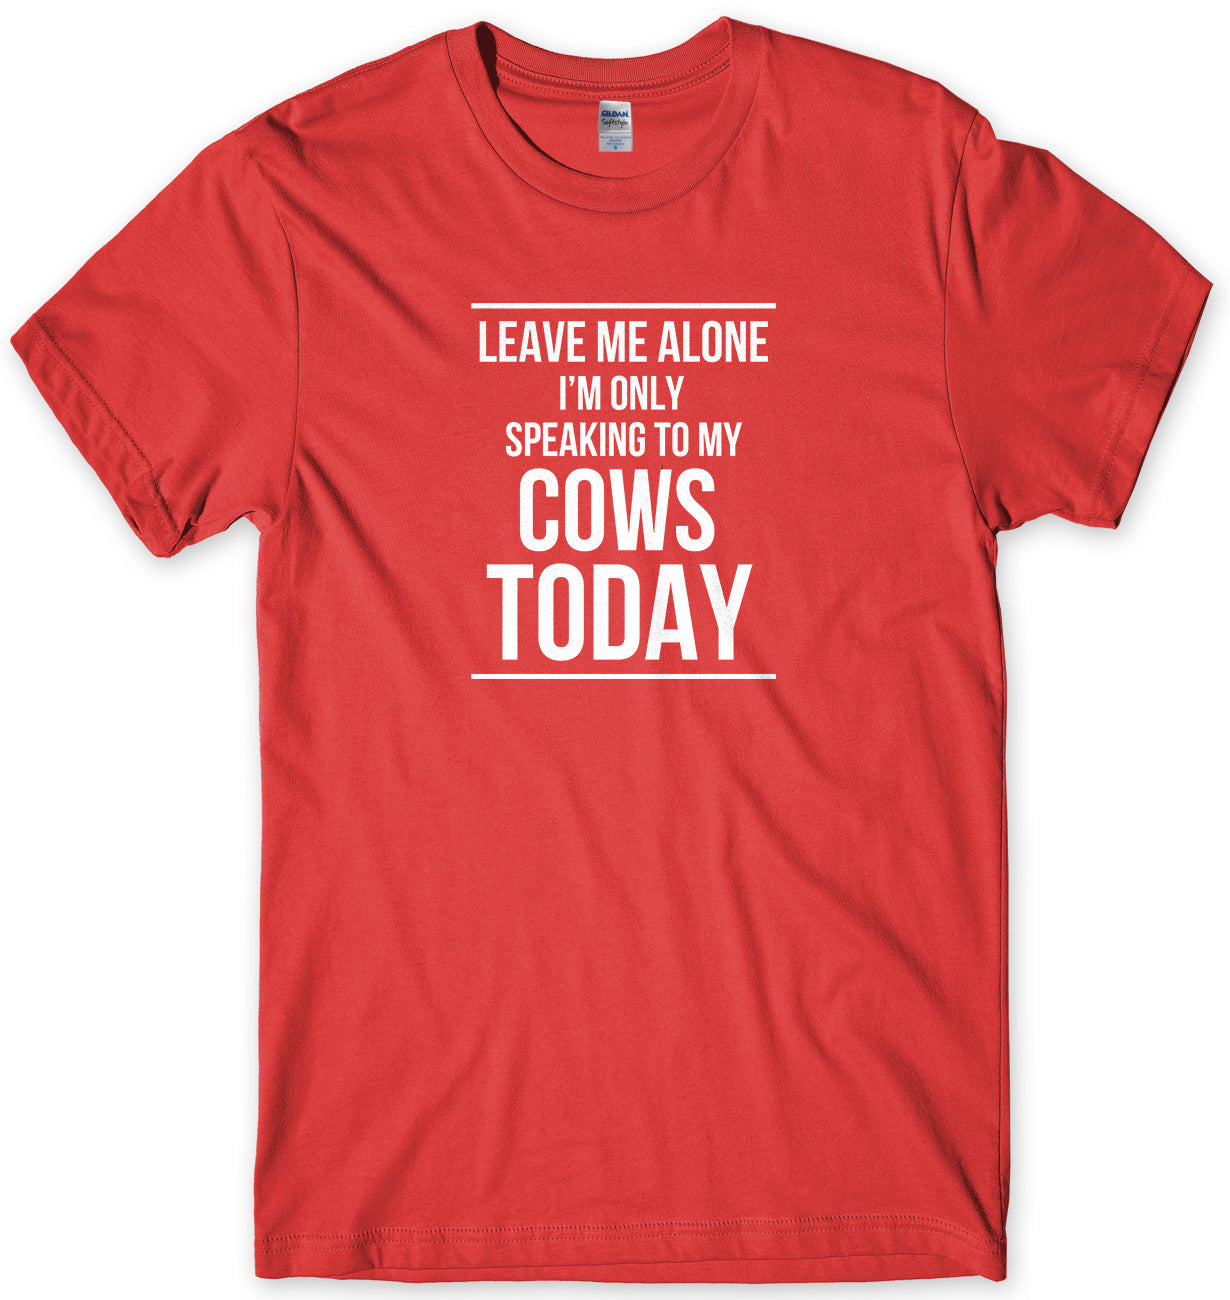 LEAVE ME ALONE I'M ONLY SPEAKING TO MY COWS TODAY MENS FUNNY SLOGAN UNISEX T-SHIRT